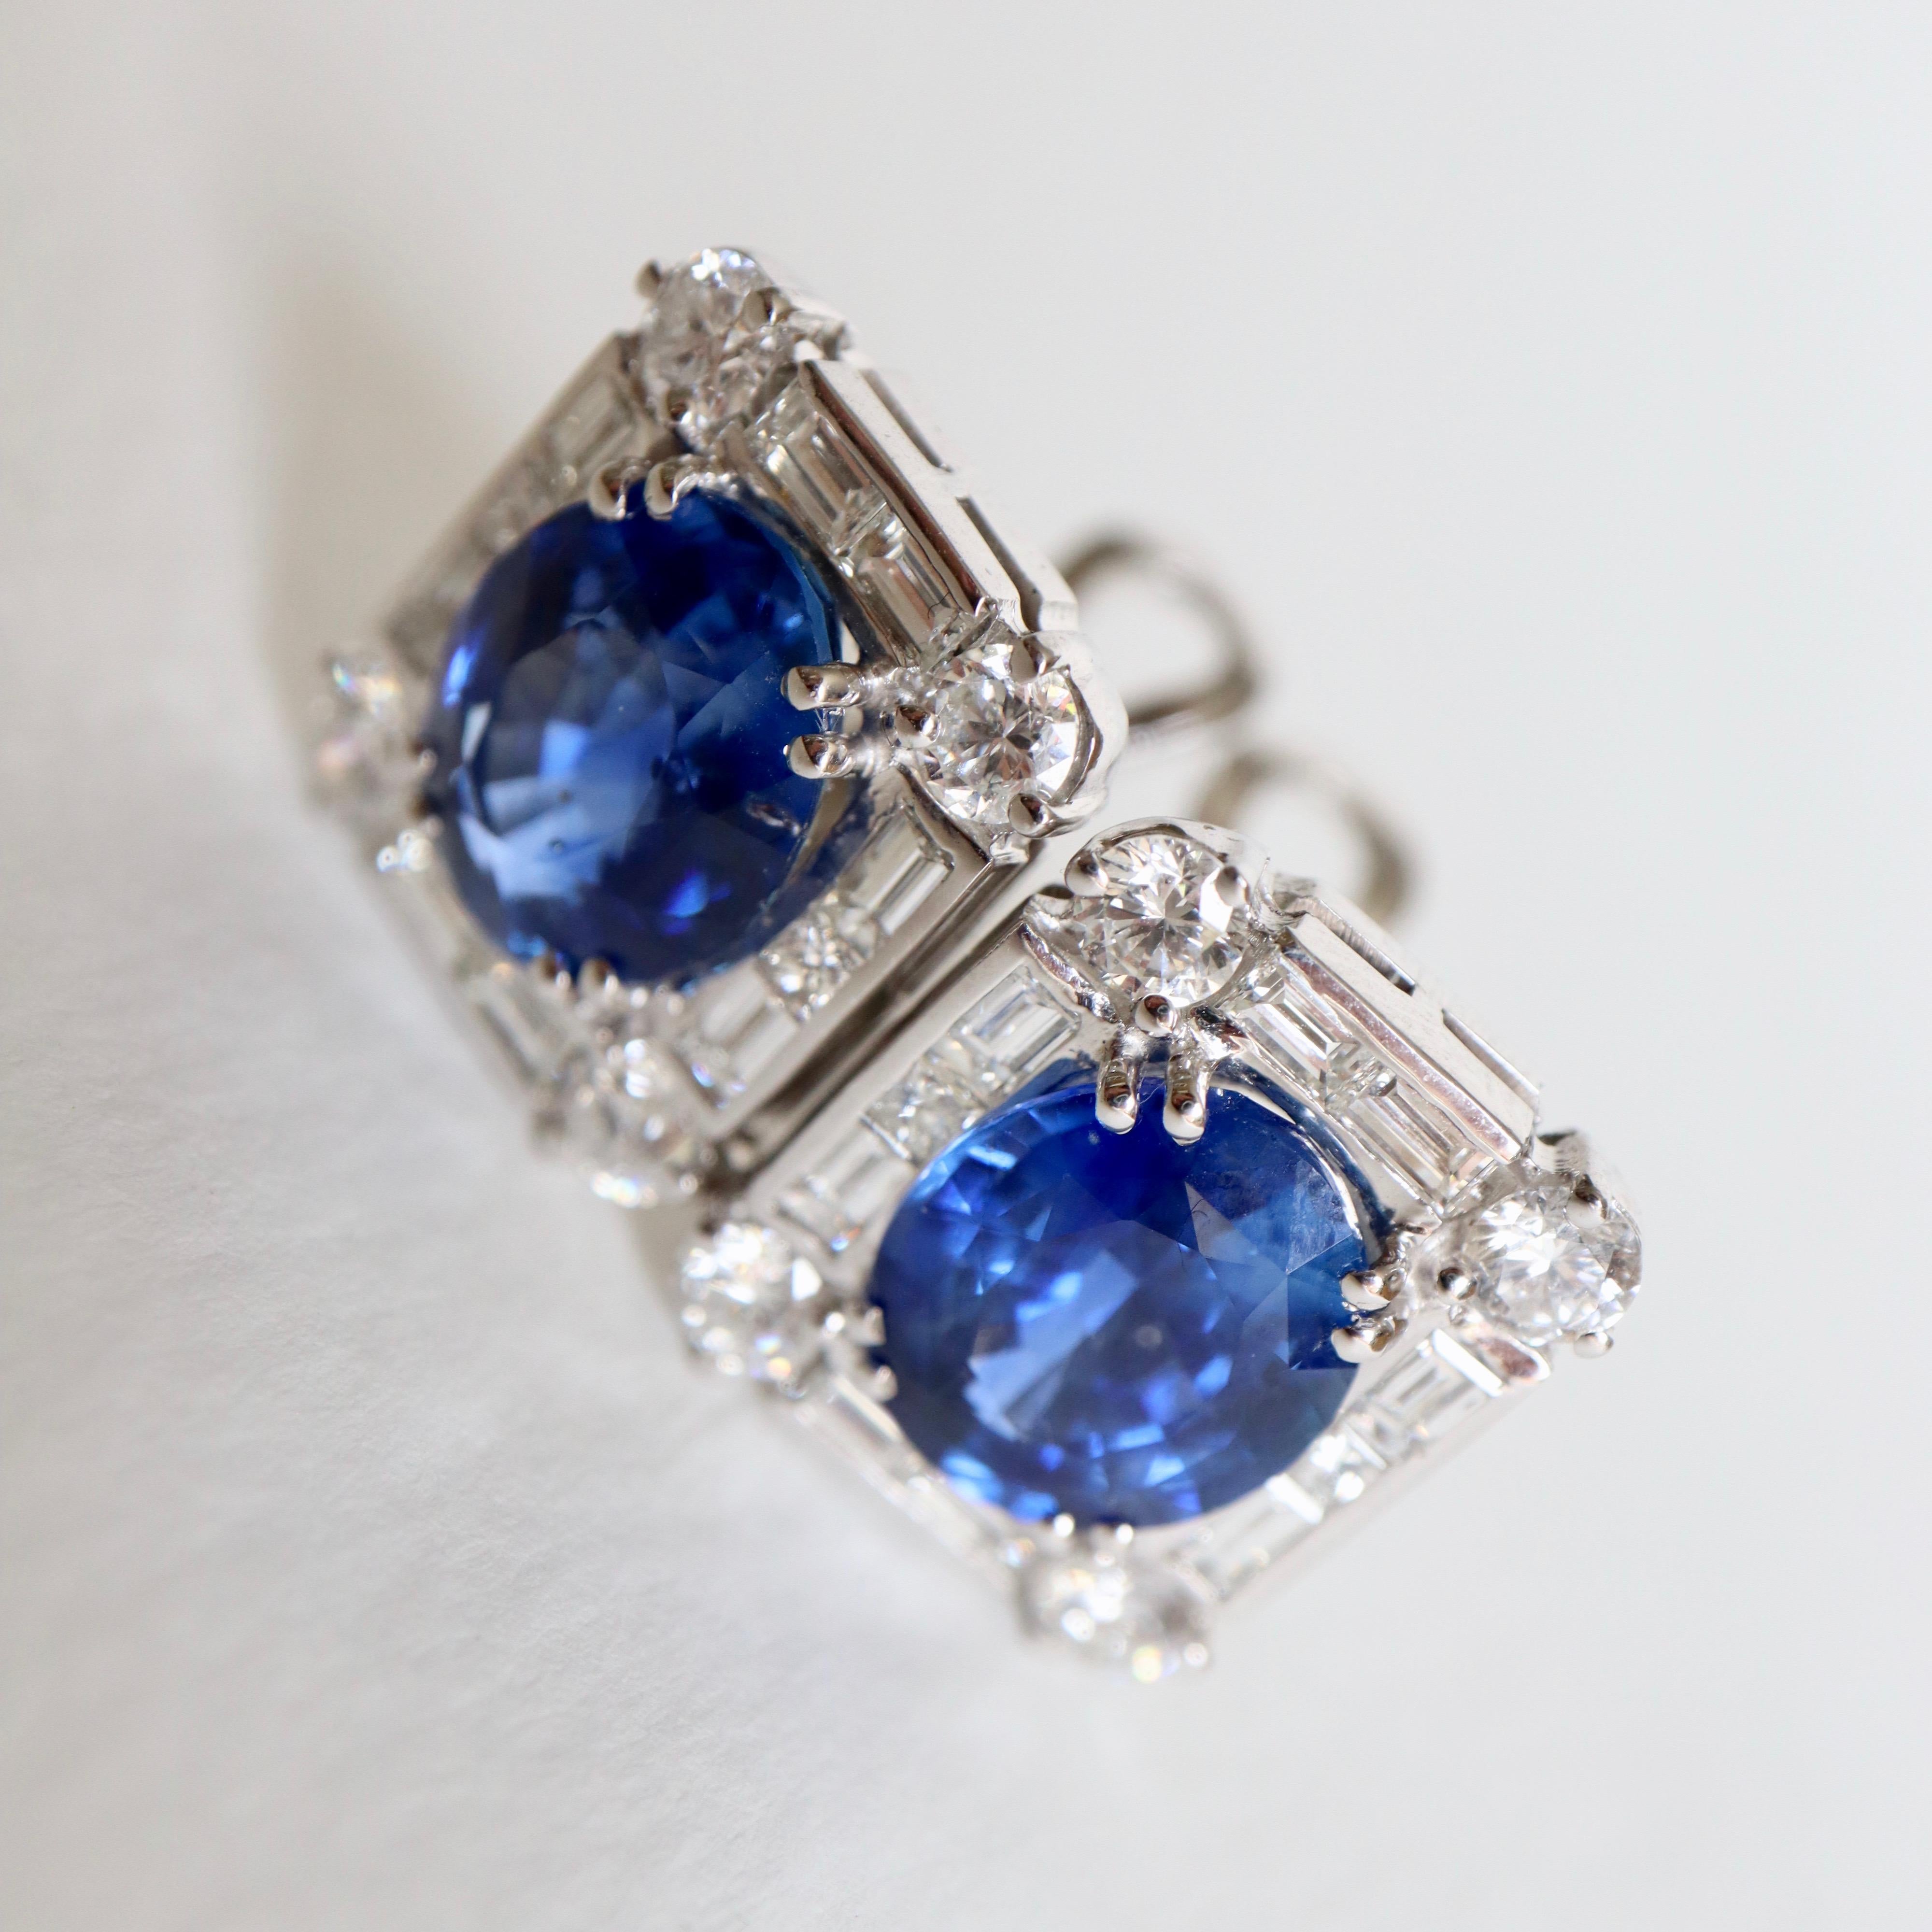 Sapphires 11 Carat Earrings in 18 Carat White Gold and Diamonds For Sale 5